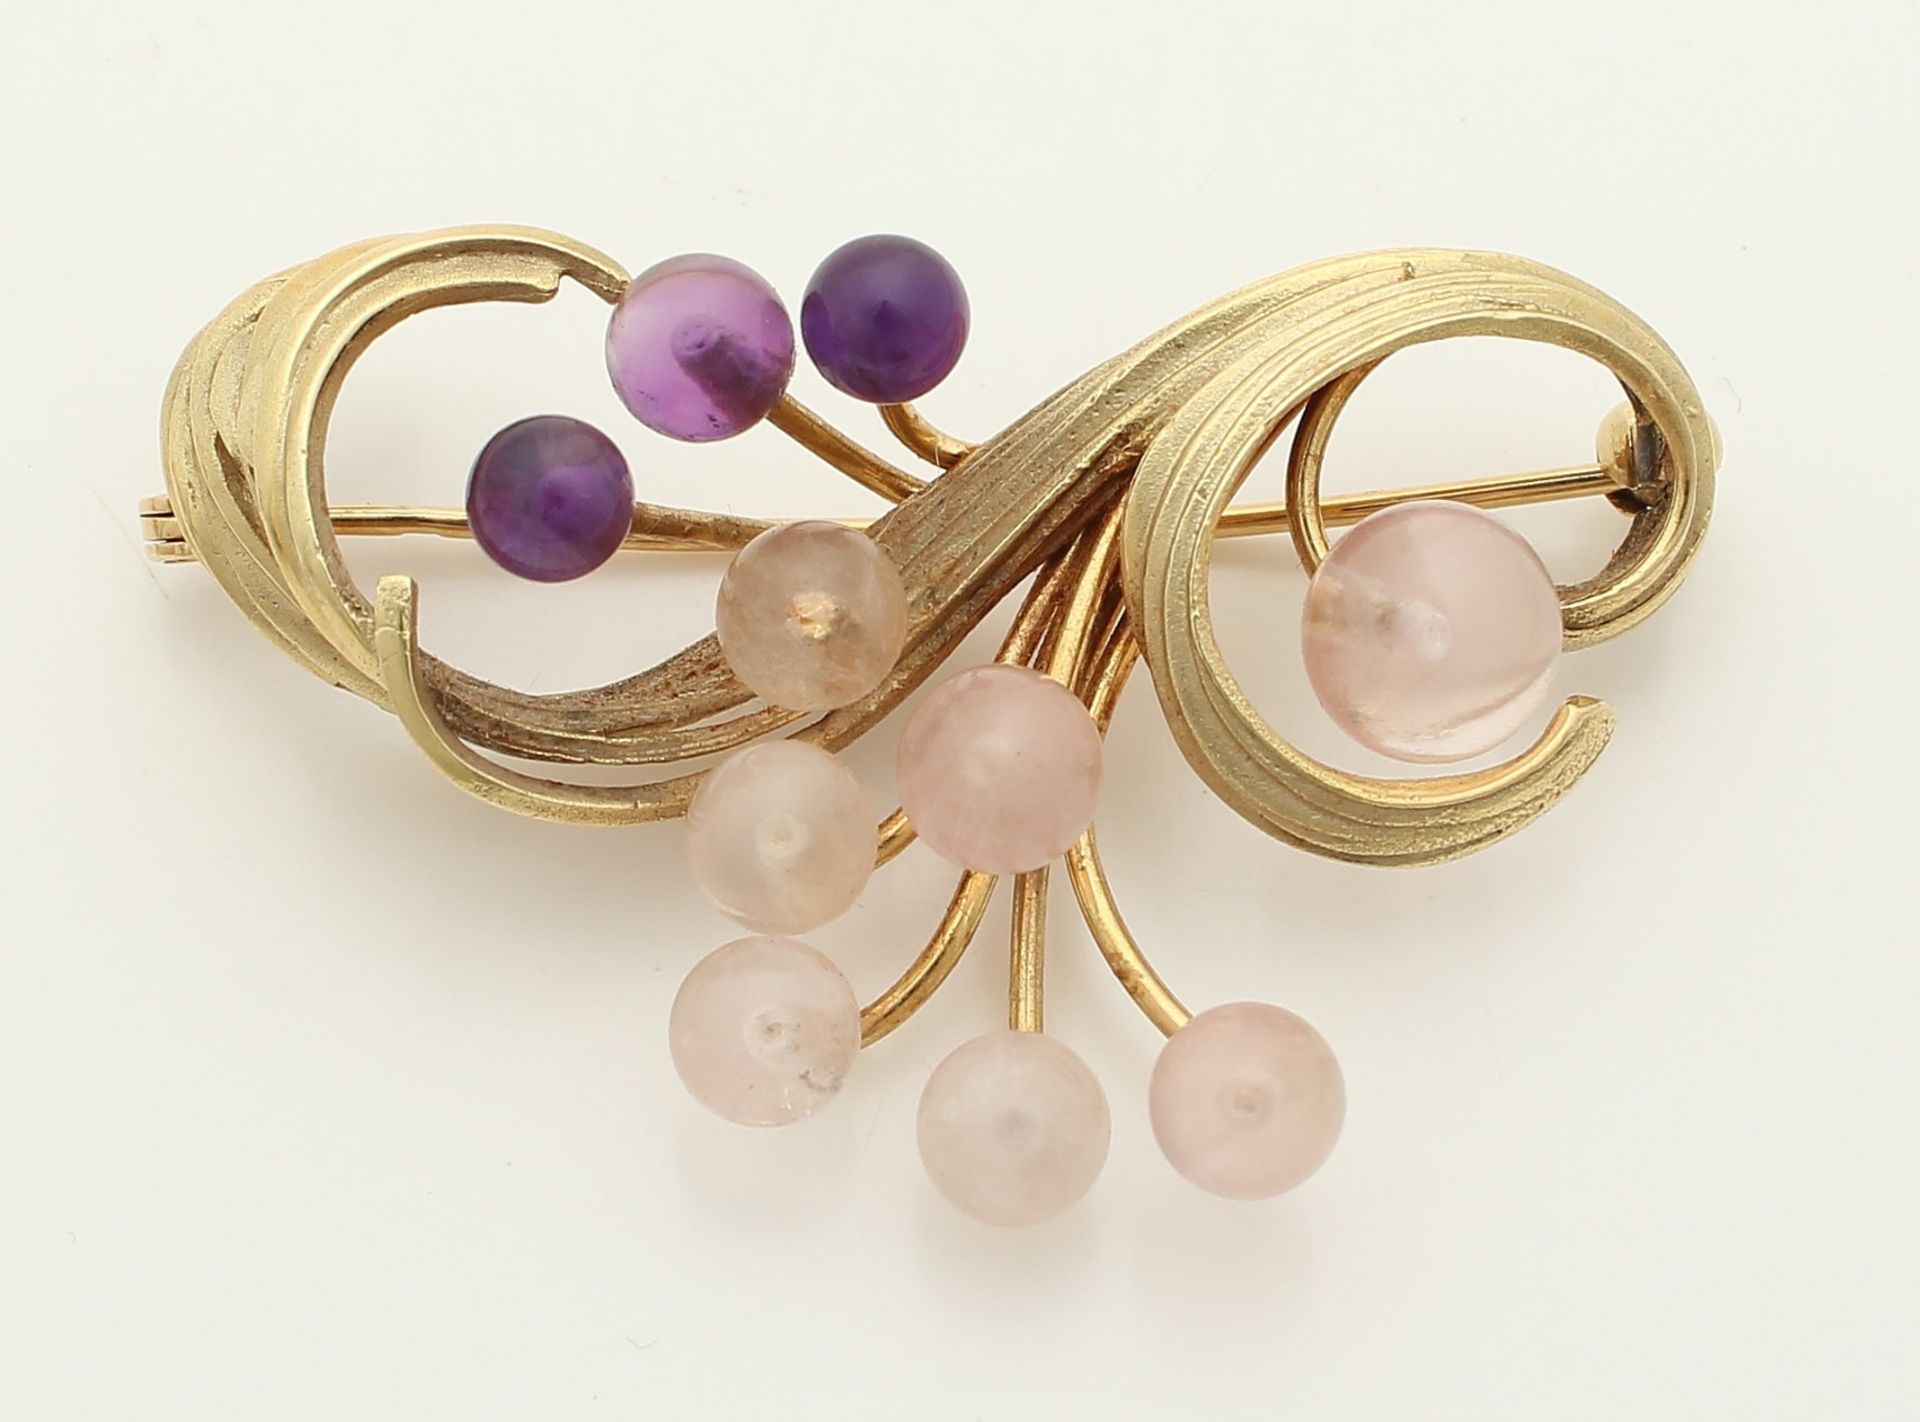 Gold brooch, 585/000, with amethyst and rose quartz. Brooch in the shape of a bow with 3 amethyst